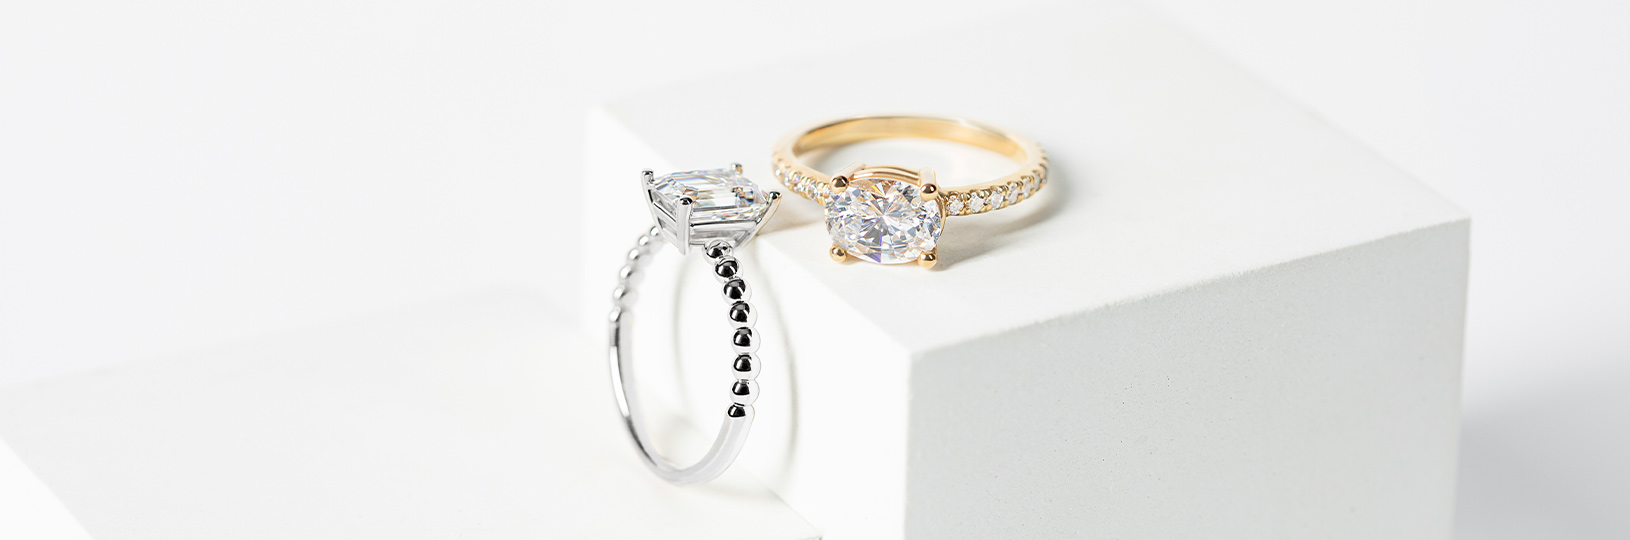 A white gold ring and a yellow gold ring